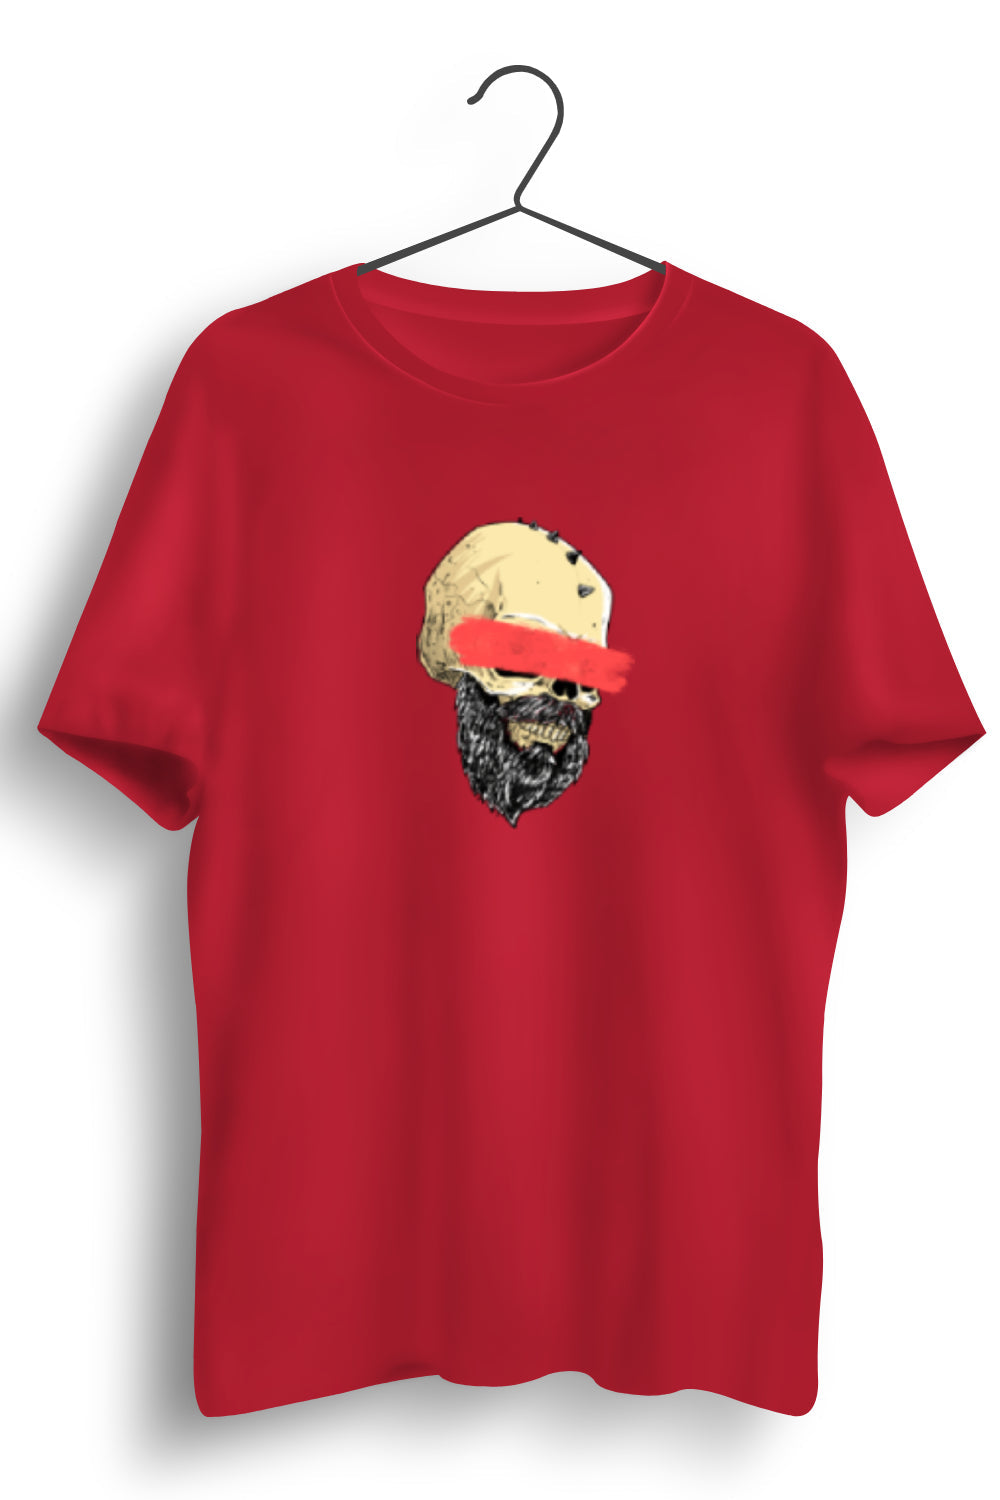 Blind Skull Graphic Printed Red Tshirt